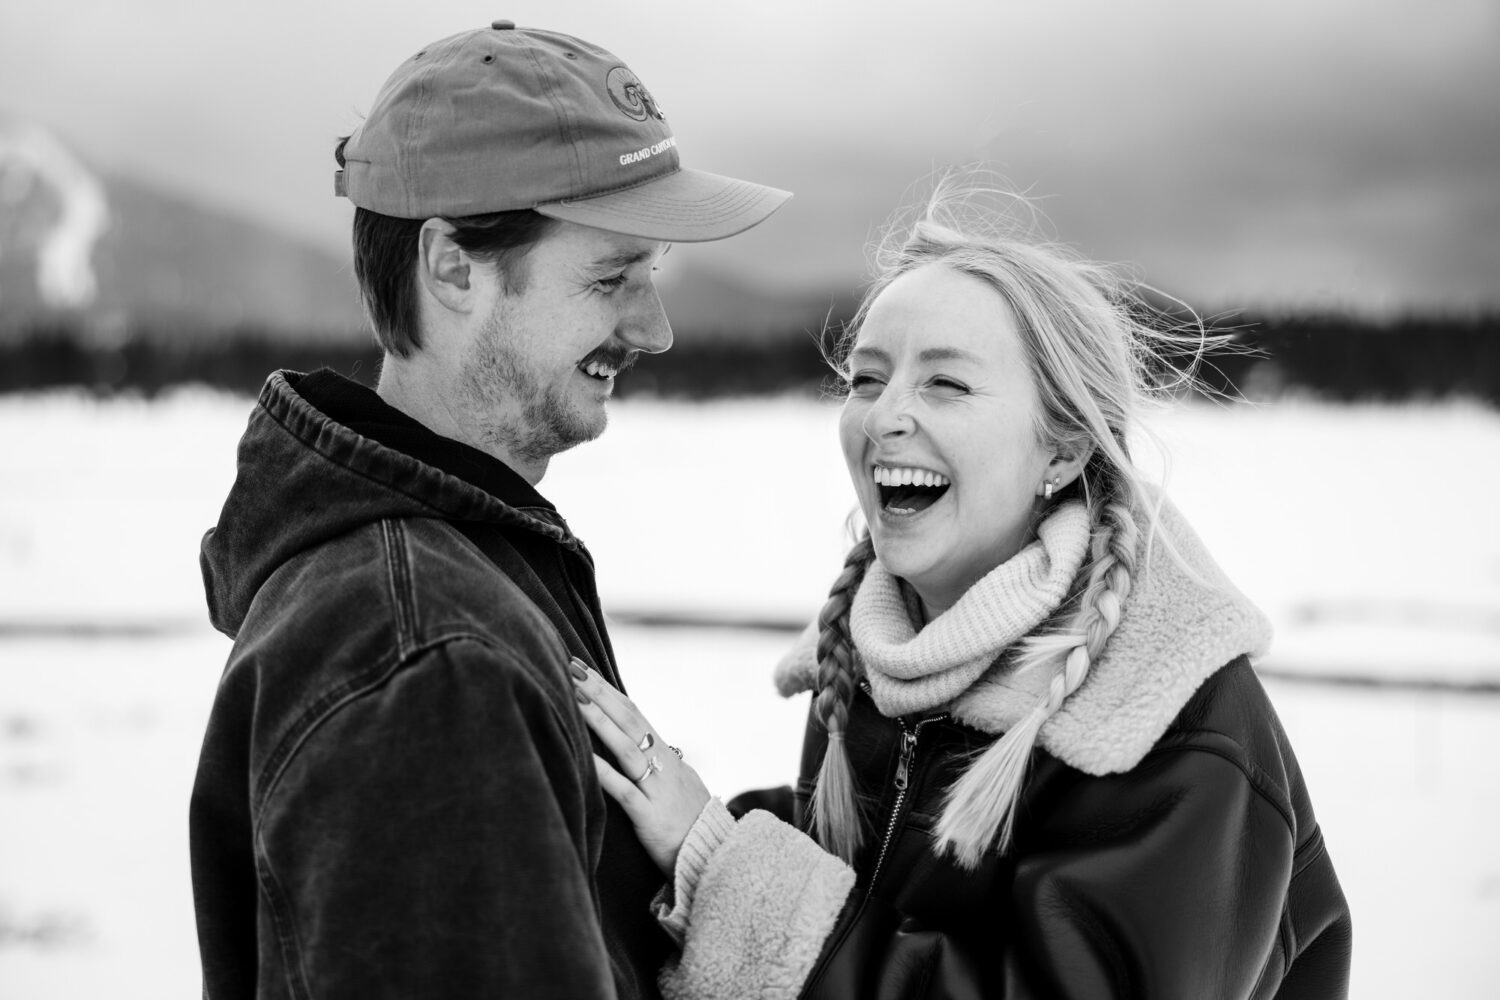 A joyful moment during a surprise wedding proposal in Lake Tahoe during winter.